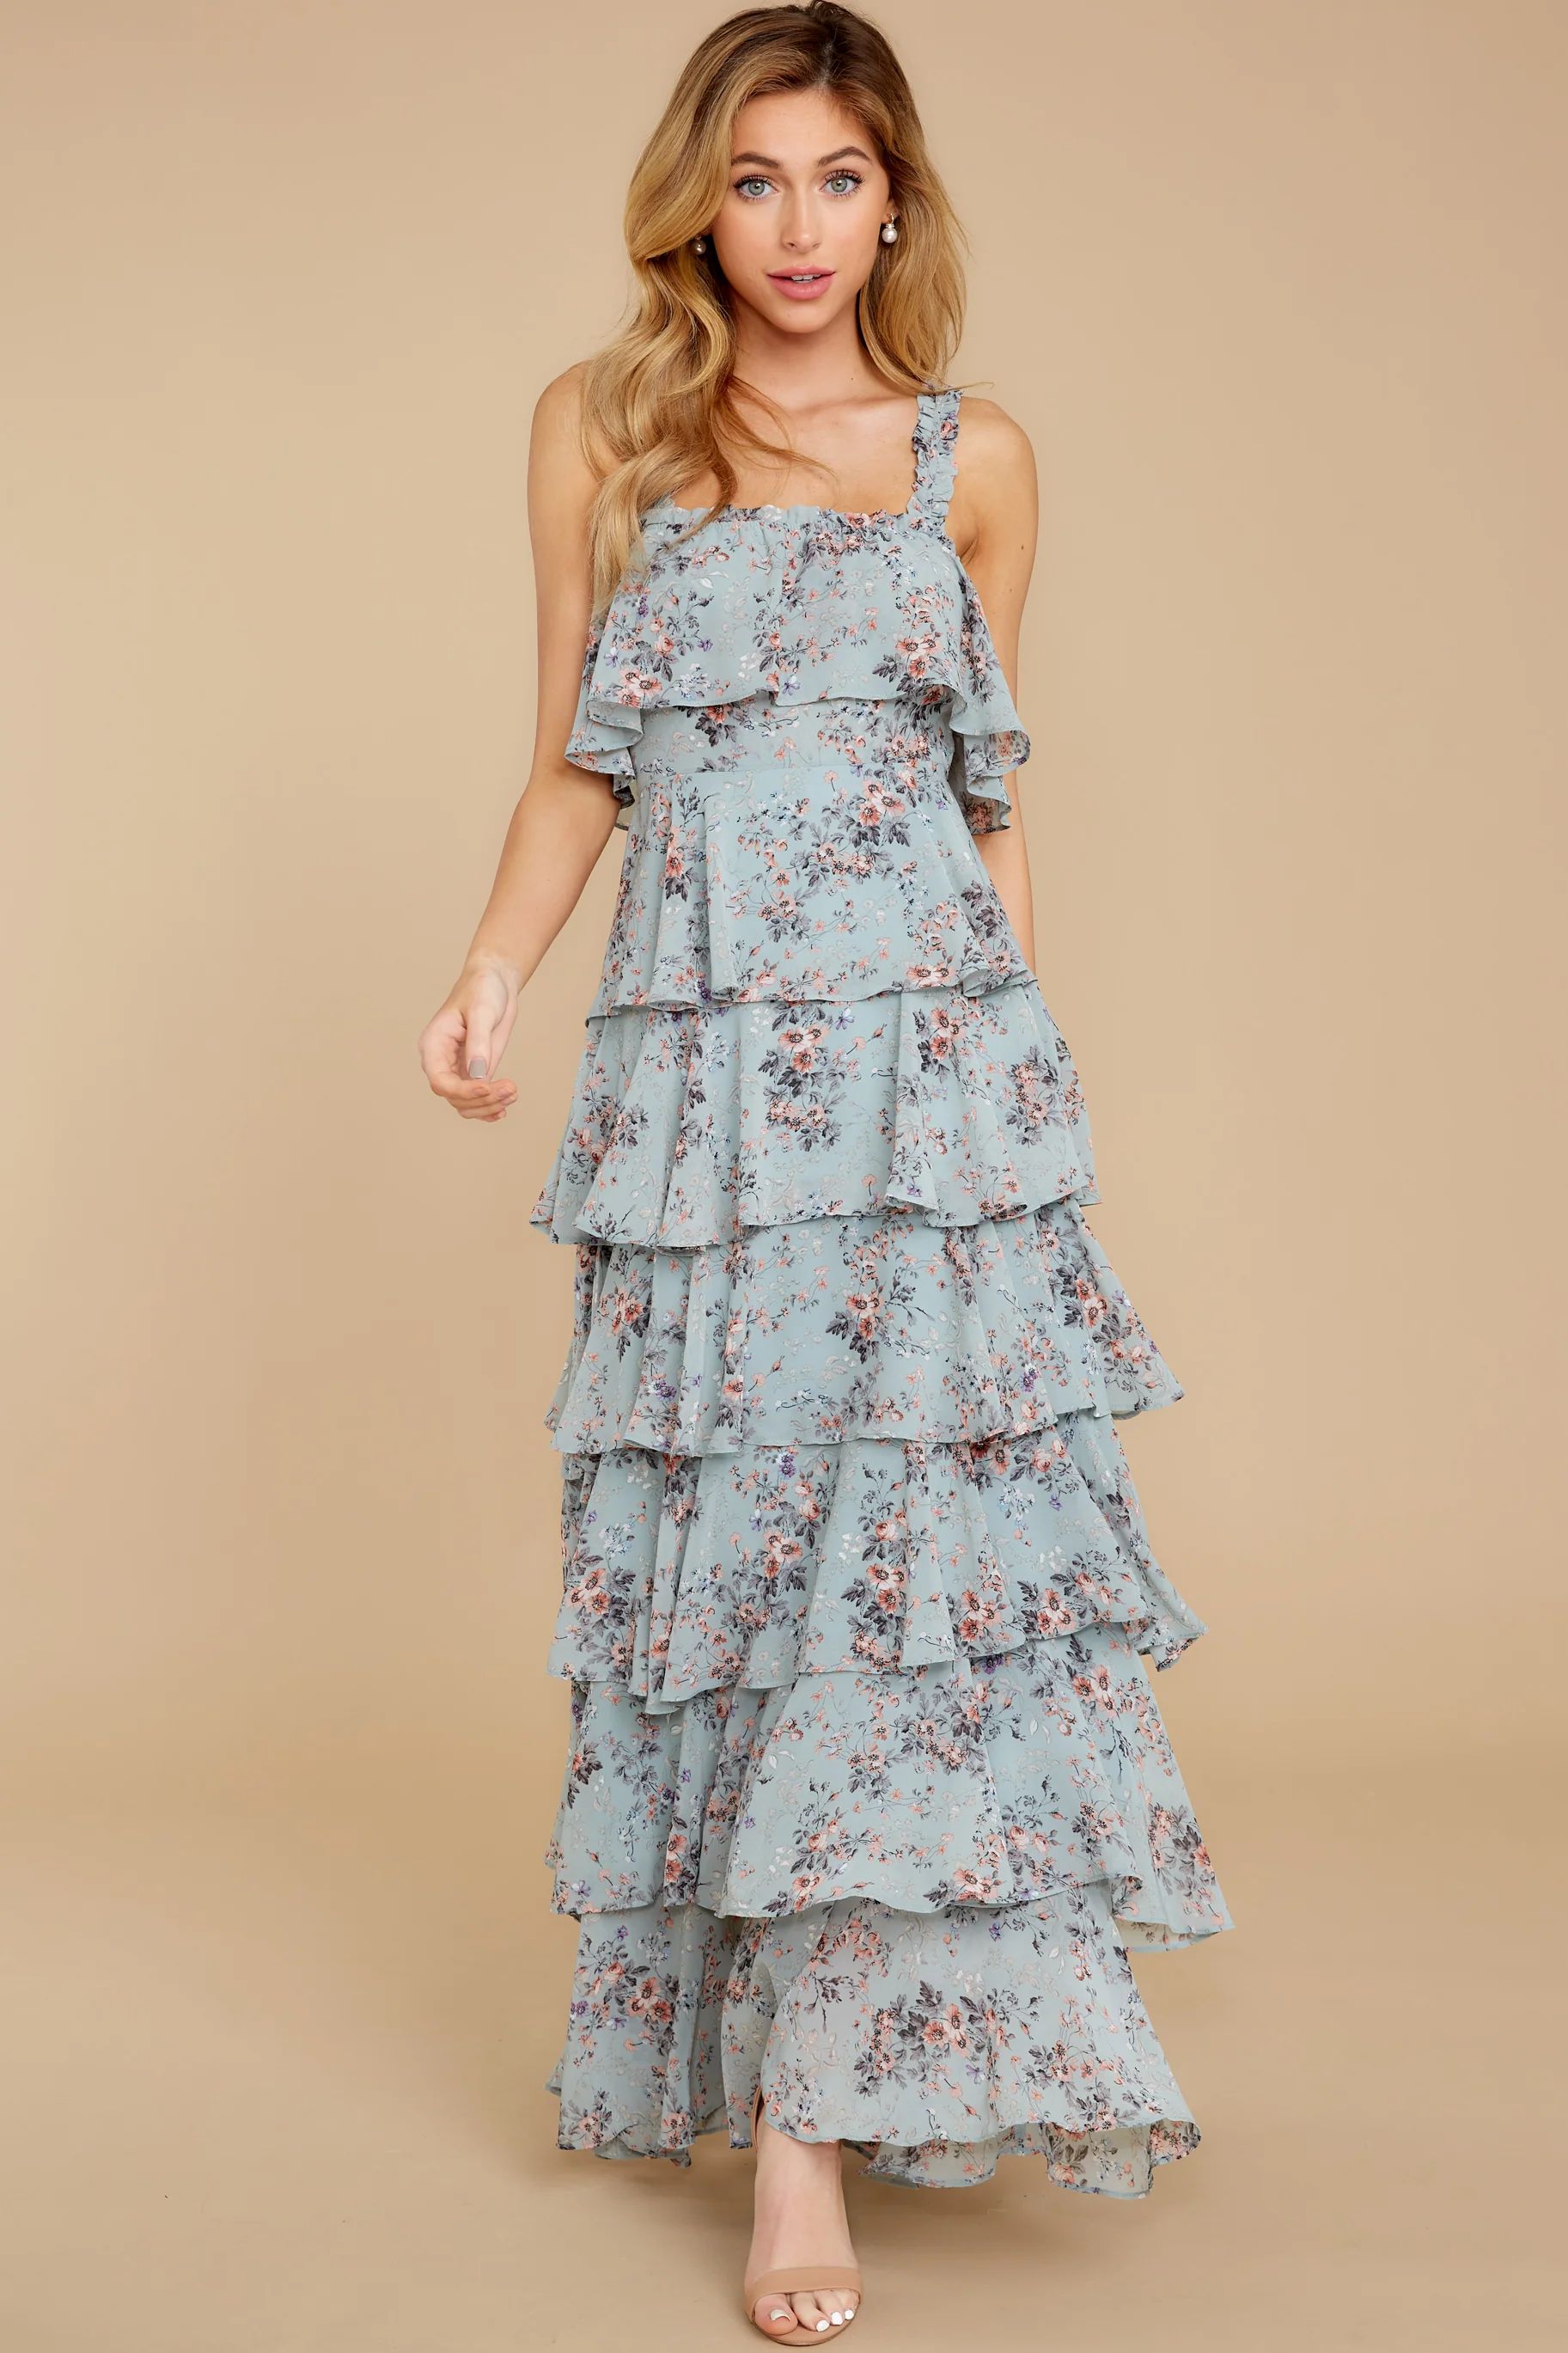 The Story's Not Over Light Blue Floral Print Maxi Dress | Red Dress 